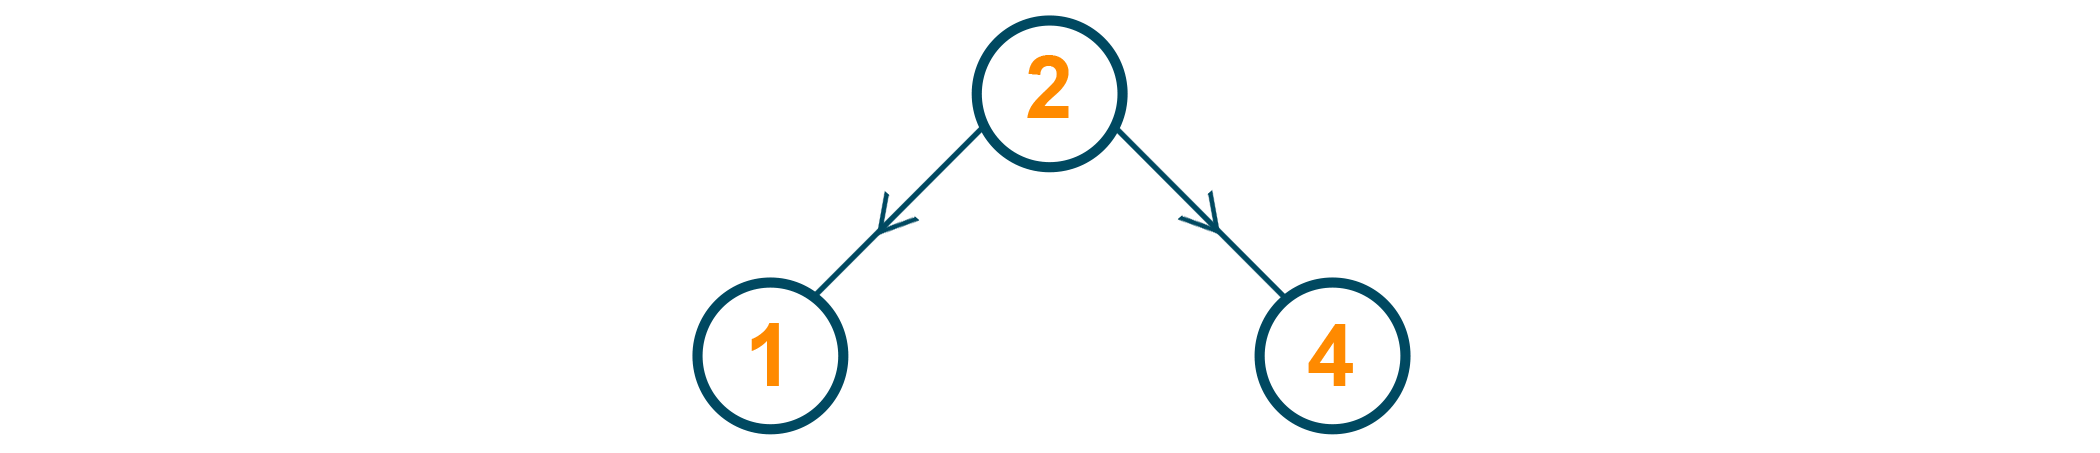 Node 1 is inserted as a left child of Node 2 